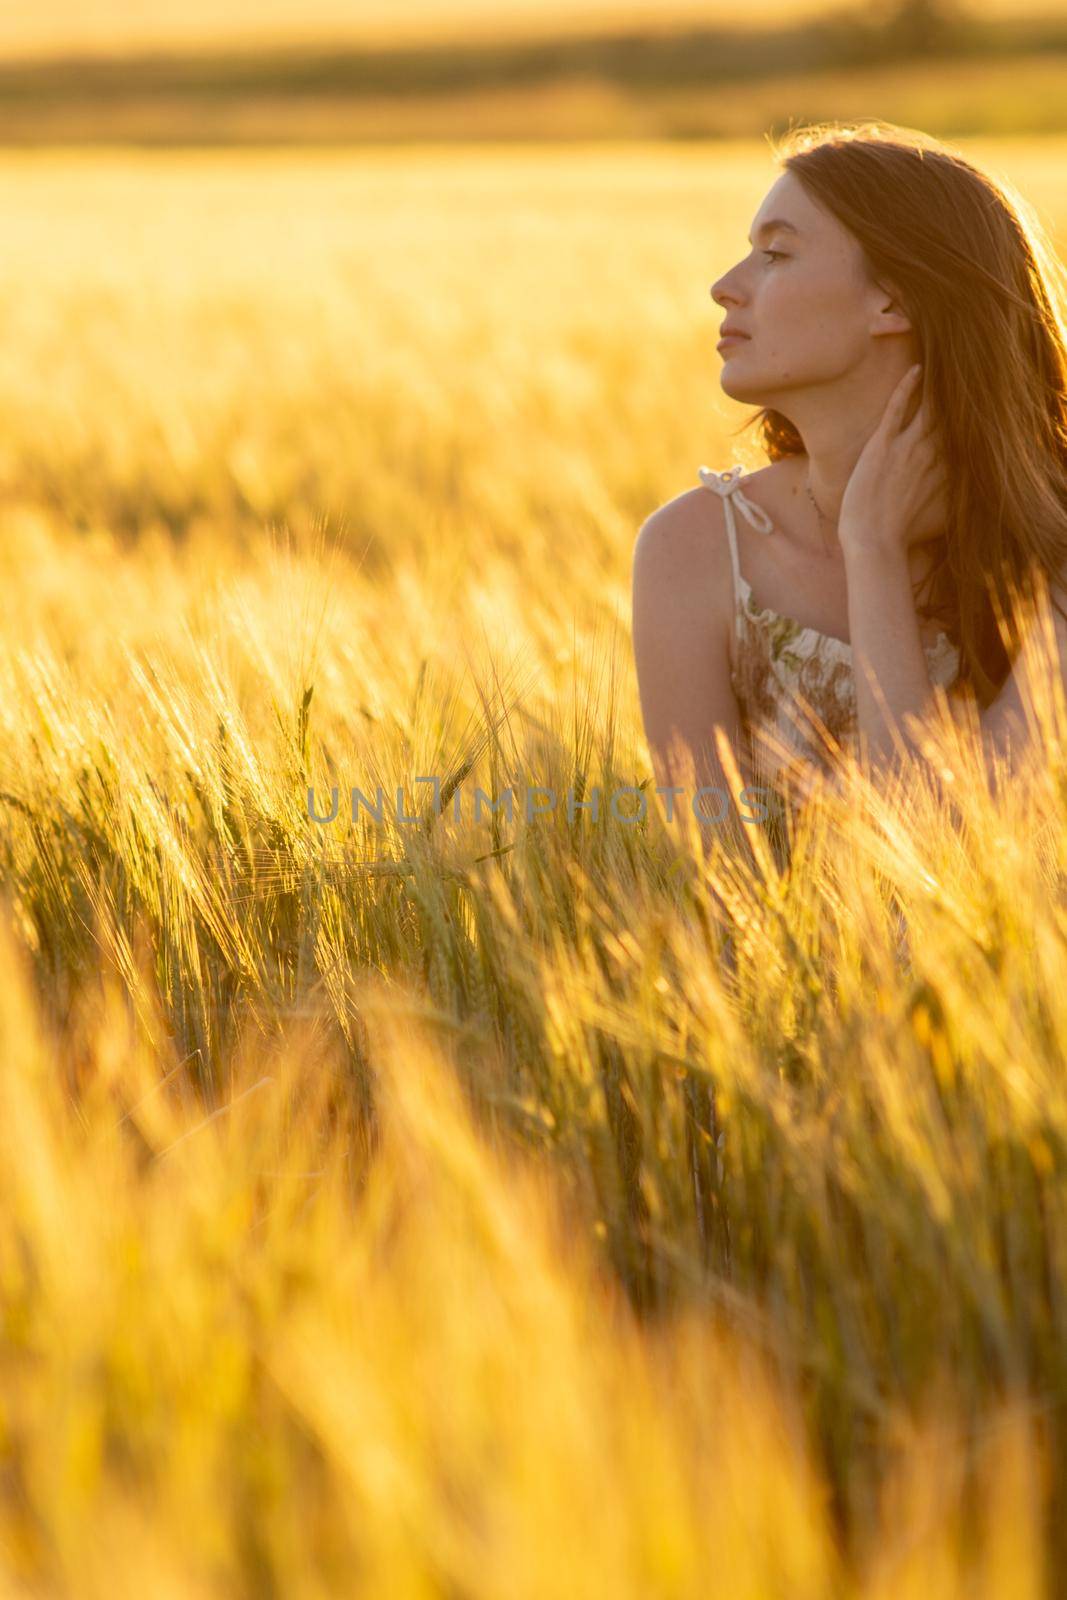 Girl in a dress in a wheat field at sunset by AlikMulikov